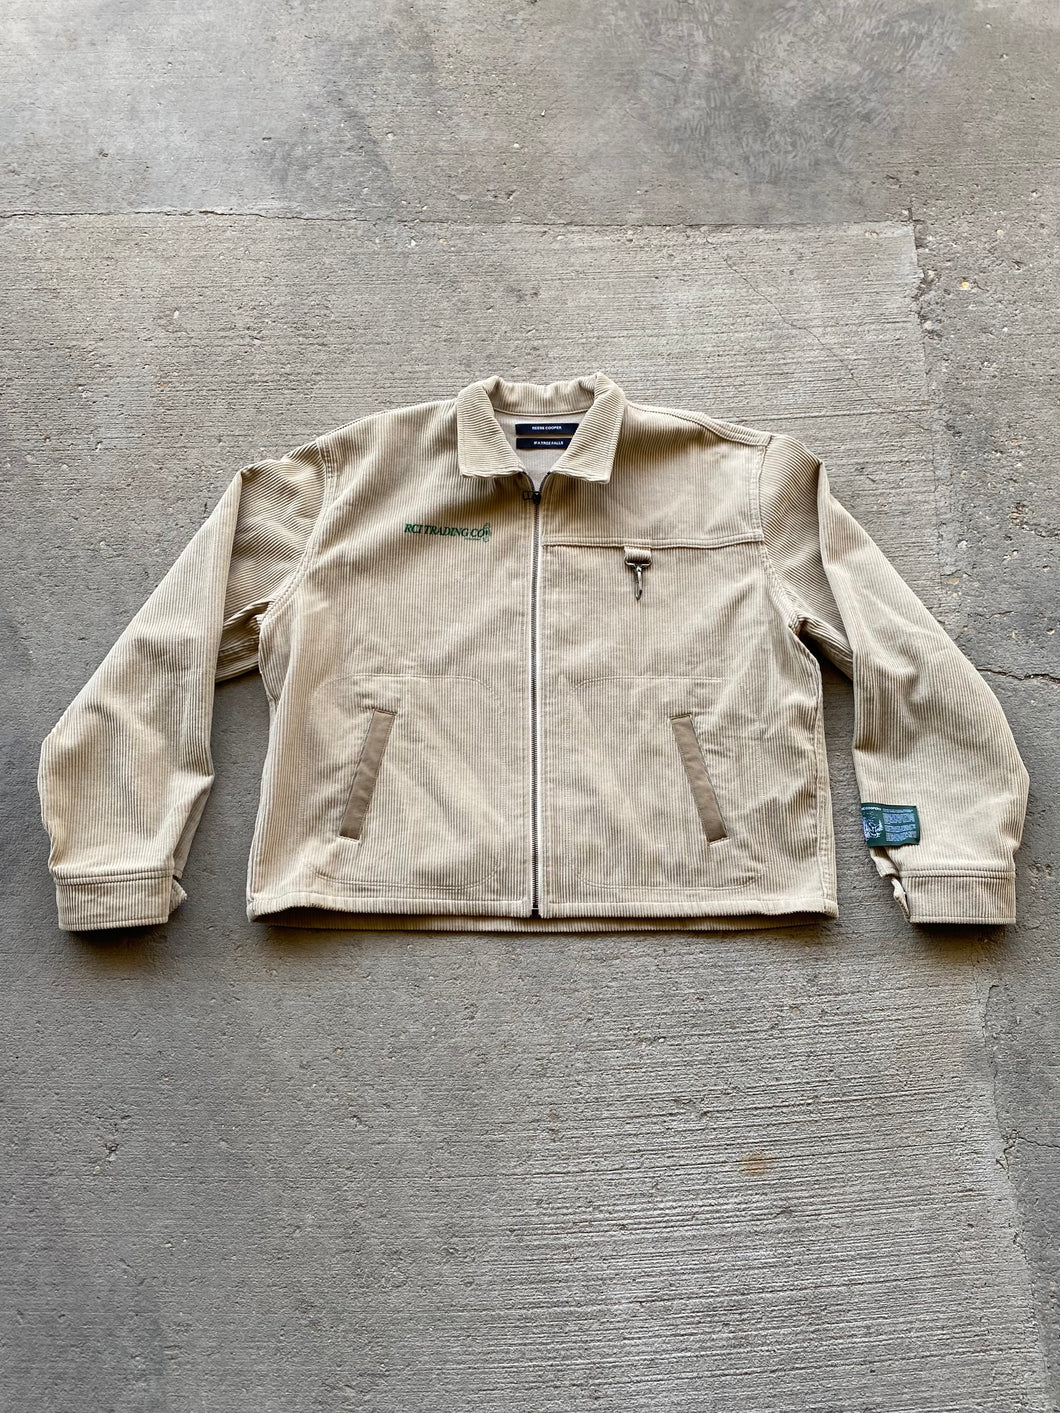 Reese cooper corduroy hunting division jacket (size xl)